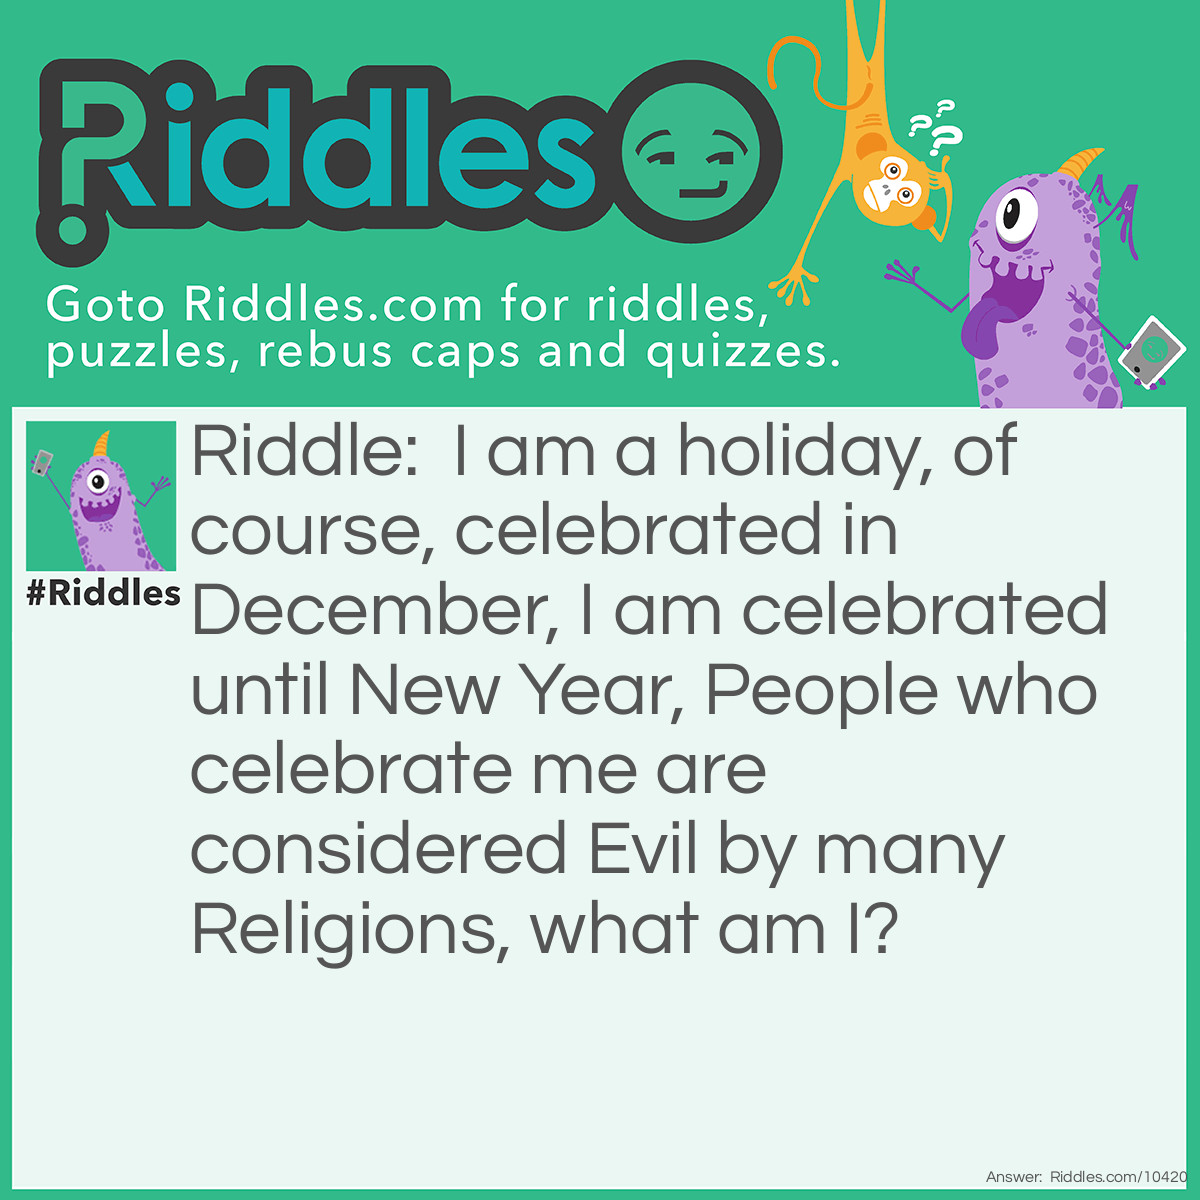 Riddle: I am a holiday, of course, celebrated in December, I am celebrated until New Year, People who celebrate me are considered Evil by many Religions, what am I? Answer: I am Yule!